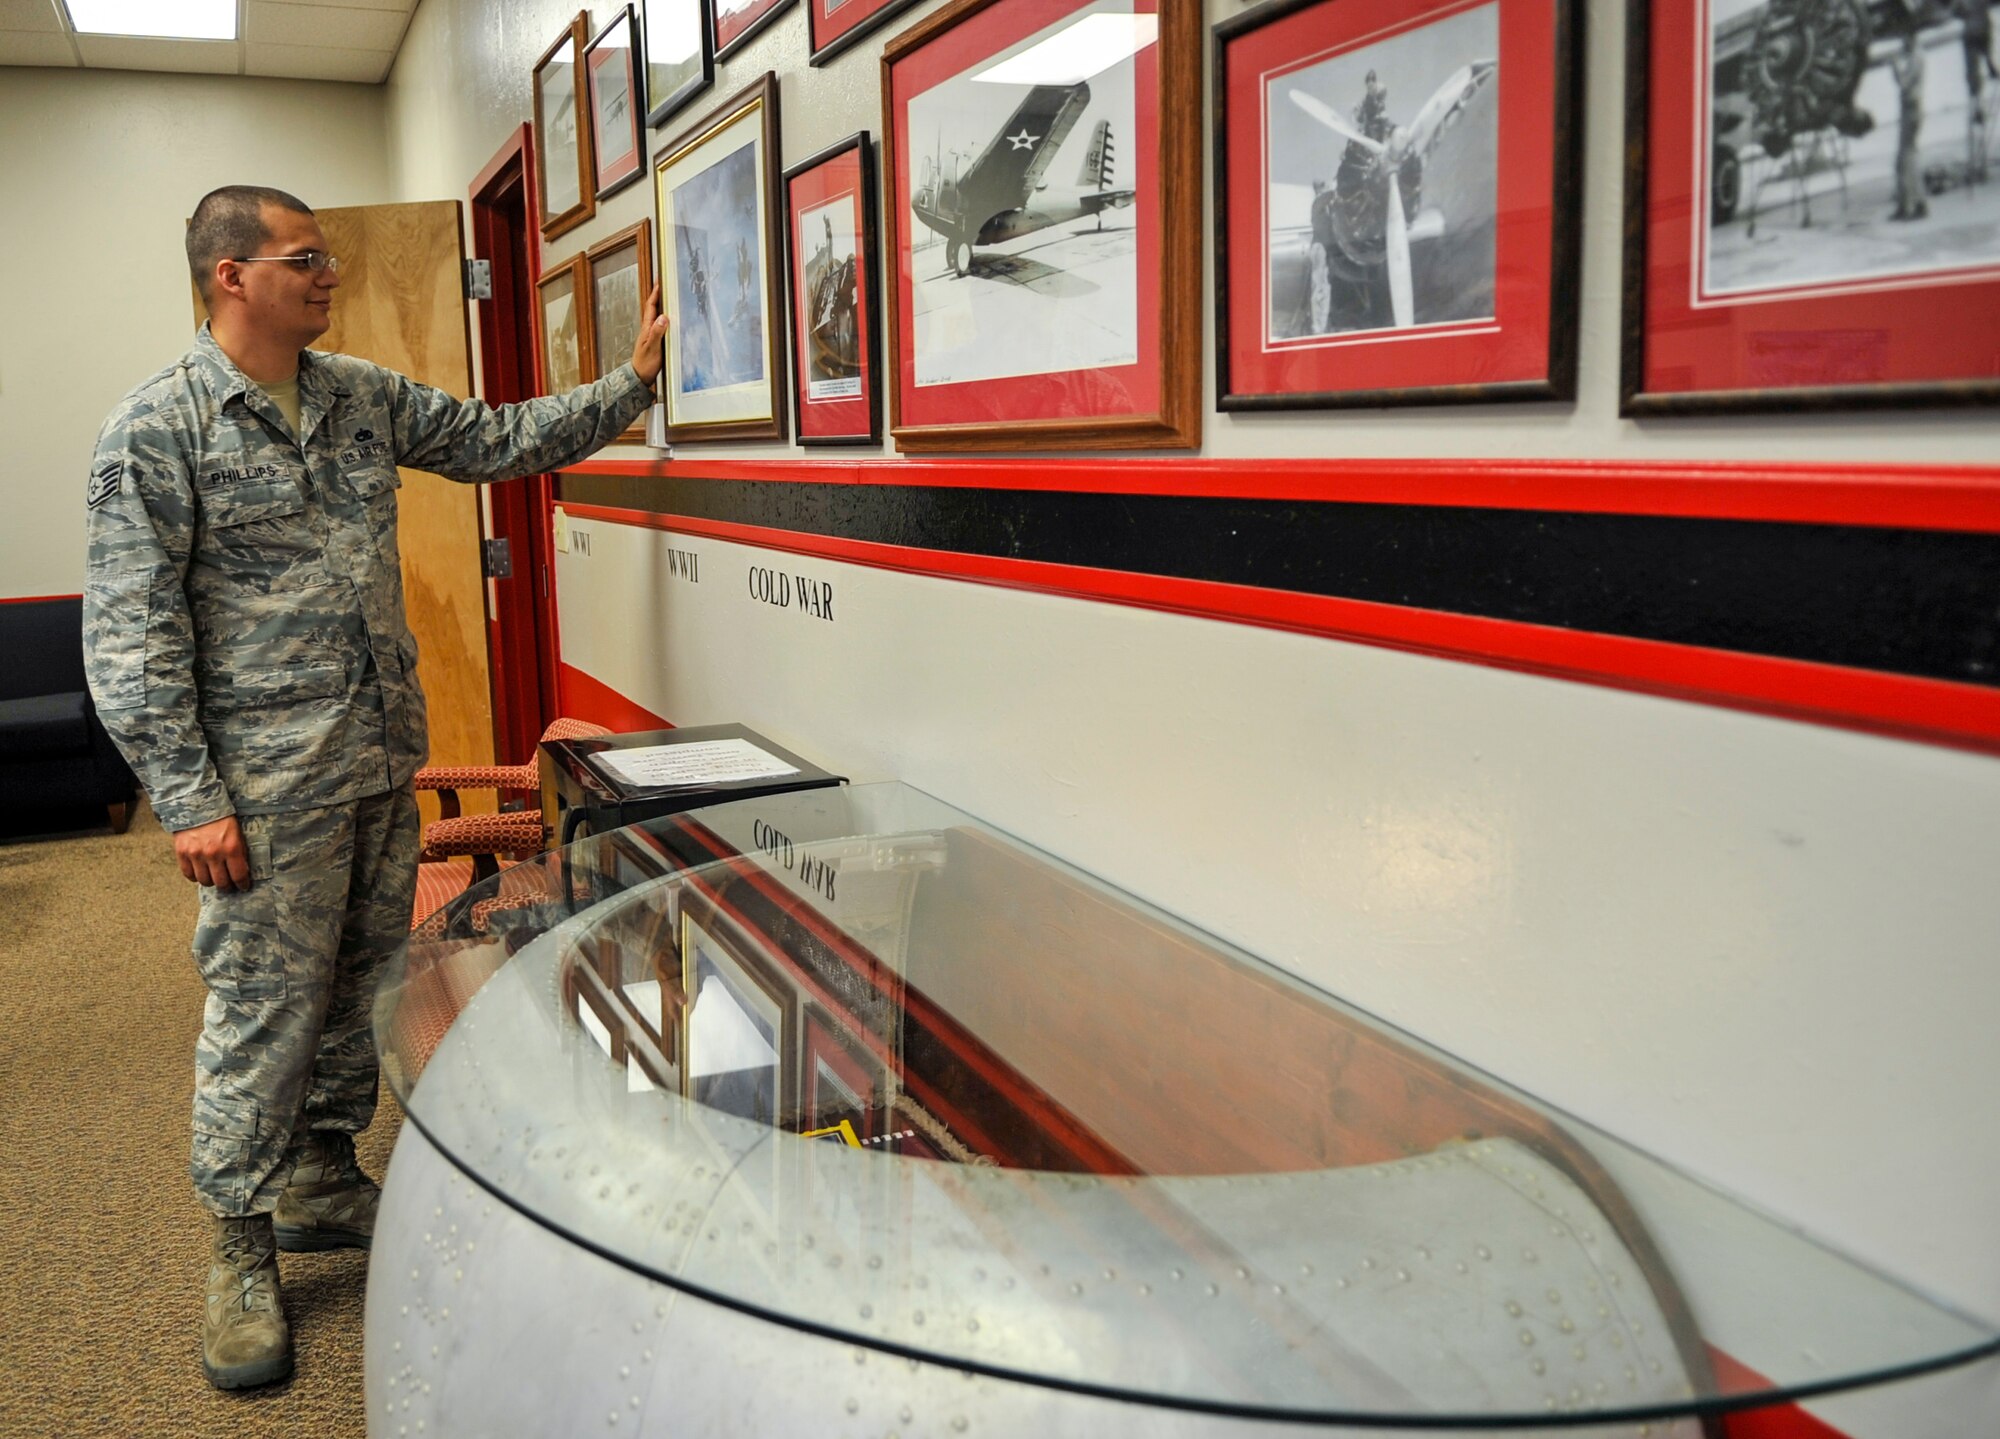 Staff Sgt. Harley Phillips, 2nd Aircraft Maintenance Squadron debrief assistant NCO in-charge, examines a photograph in the 96th Bomb Squadron Heritage Room on Barksdale Air Force Base, La., May 9, 2014. Airmen in the 2nd Aircraft Maintenance Squadron have collected photos, posters and other items as well as donated their time to create the room’s legacy and provide a reminder to Airmen of their storied history. (U.S. Air Force photo/Airman 1st Class Benjamin Raughton)